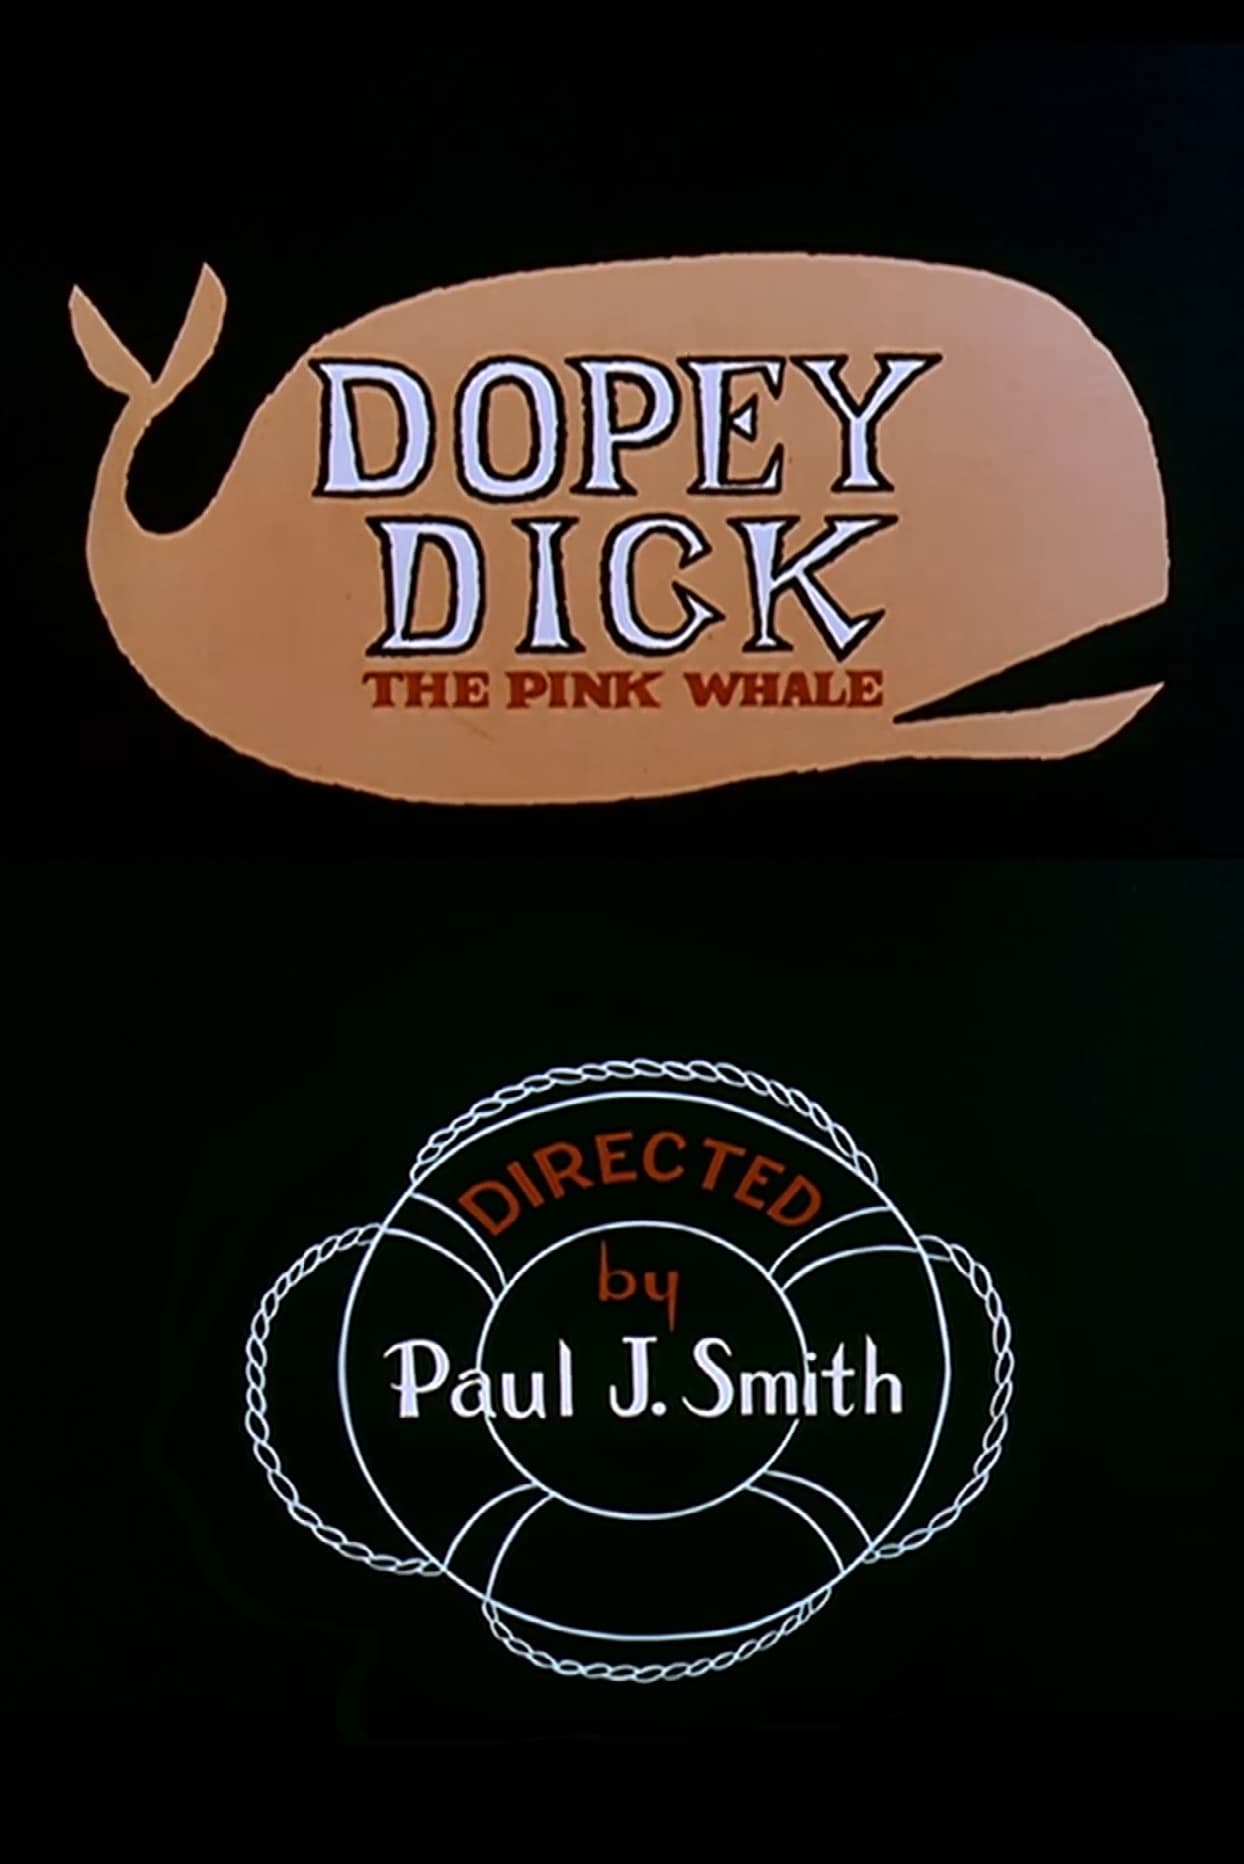 Dopey Dick, the Pink Whale